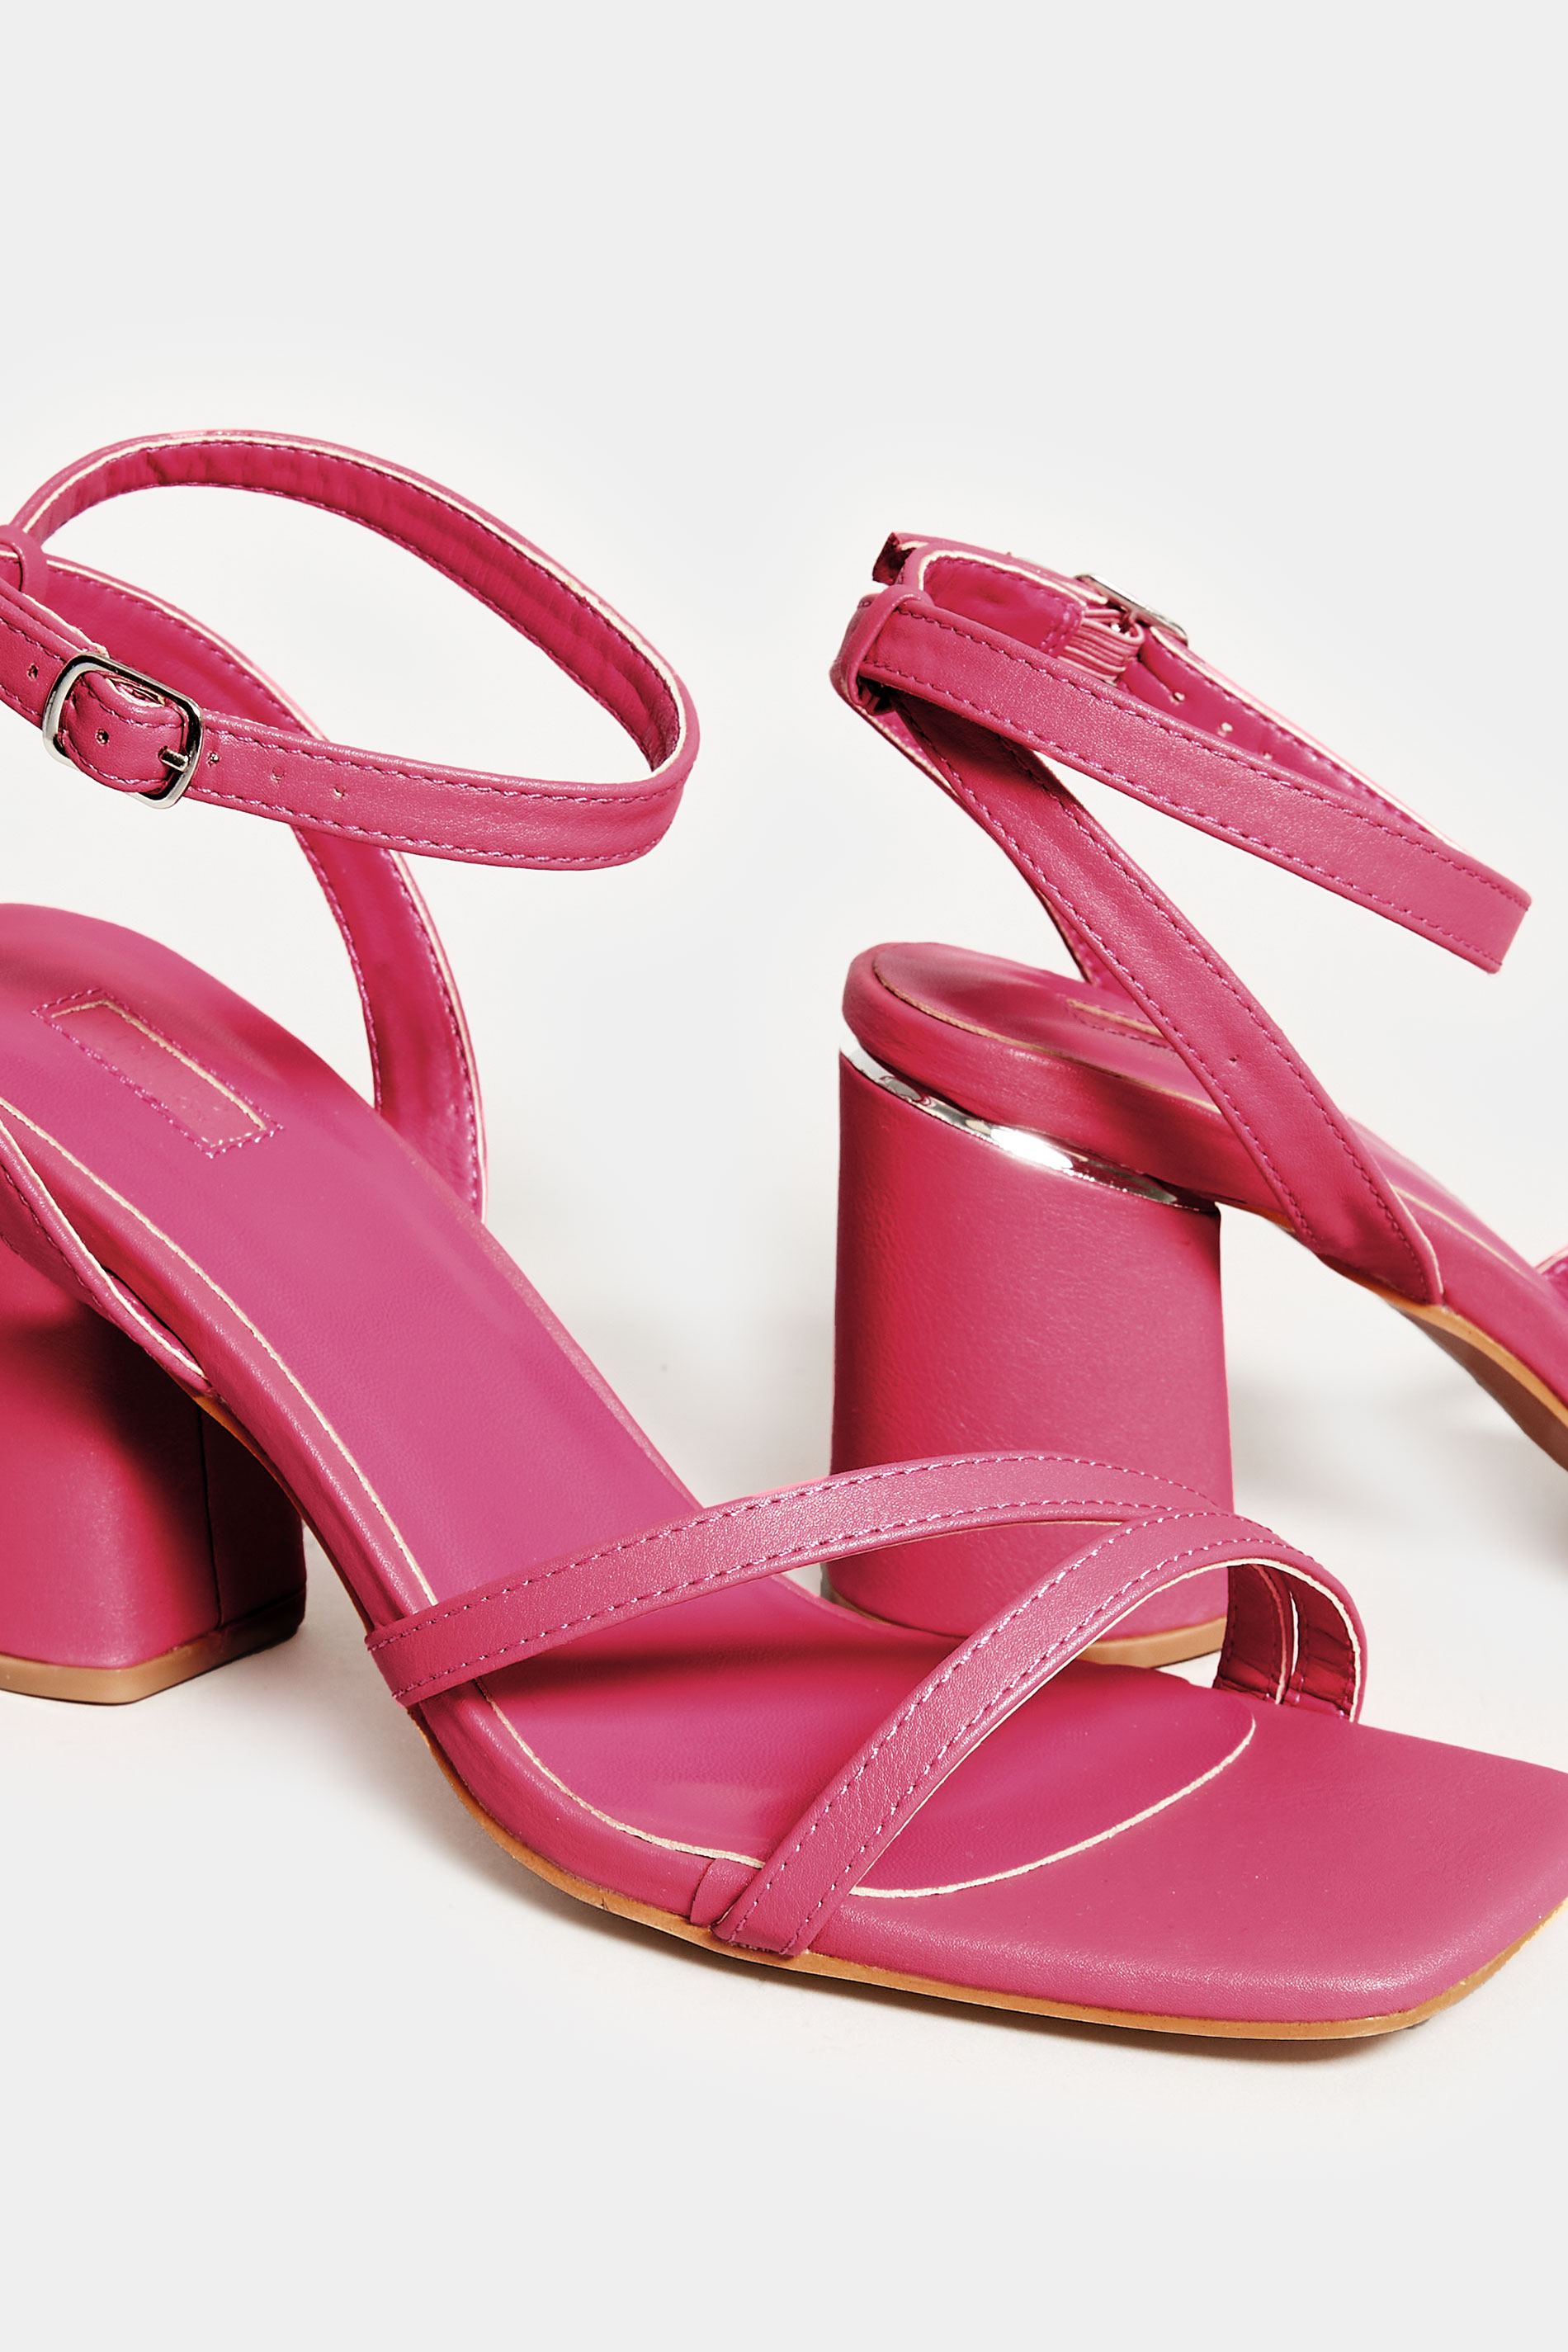 Hot Pink Asymmetrical Block Heel Sandal In Wide E Fit & Extra Fit EEE Fit